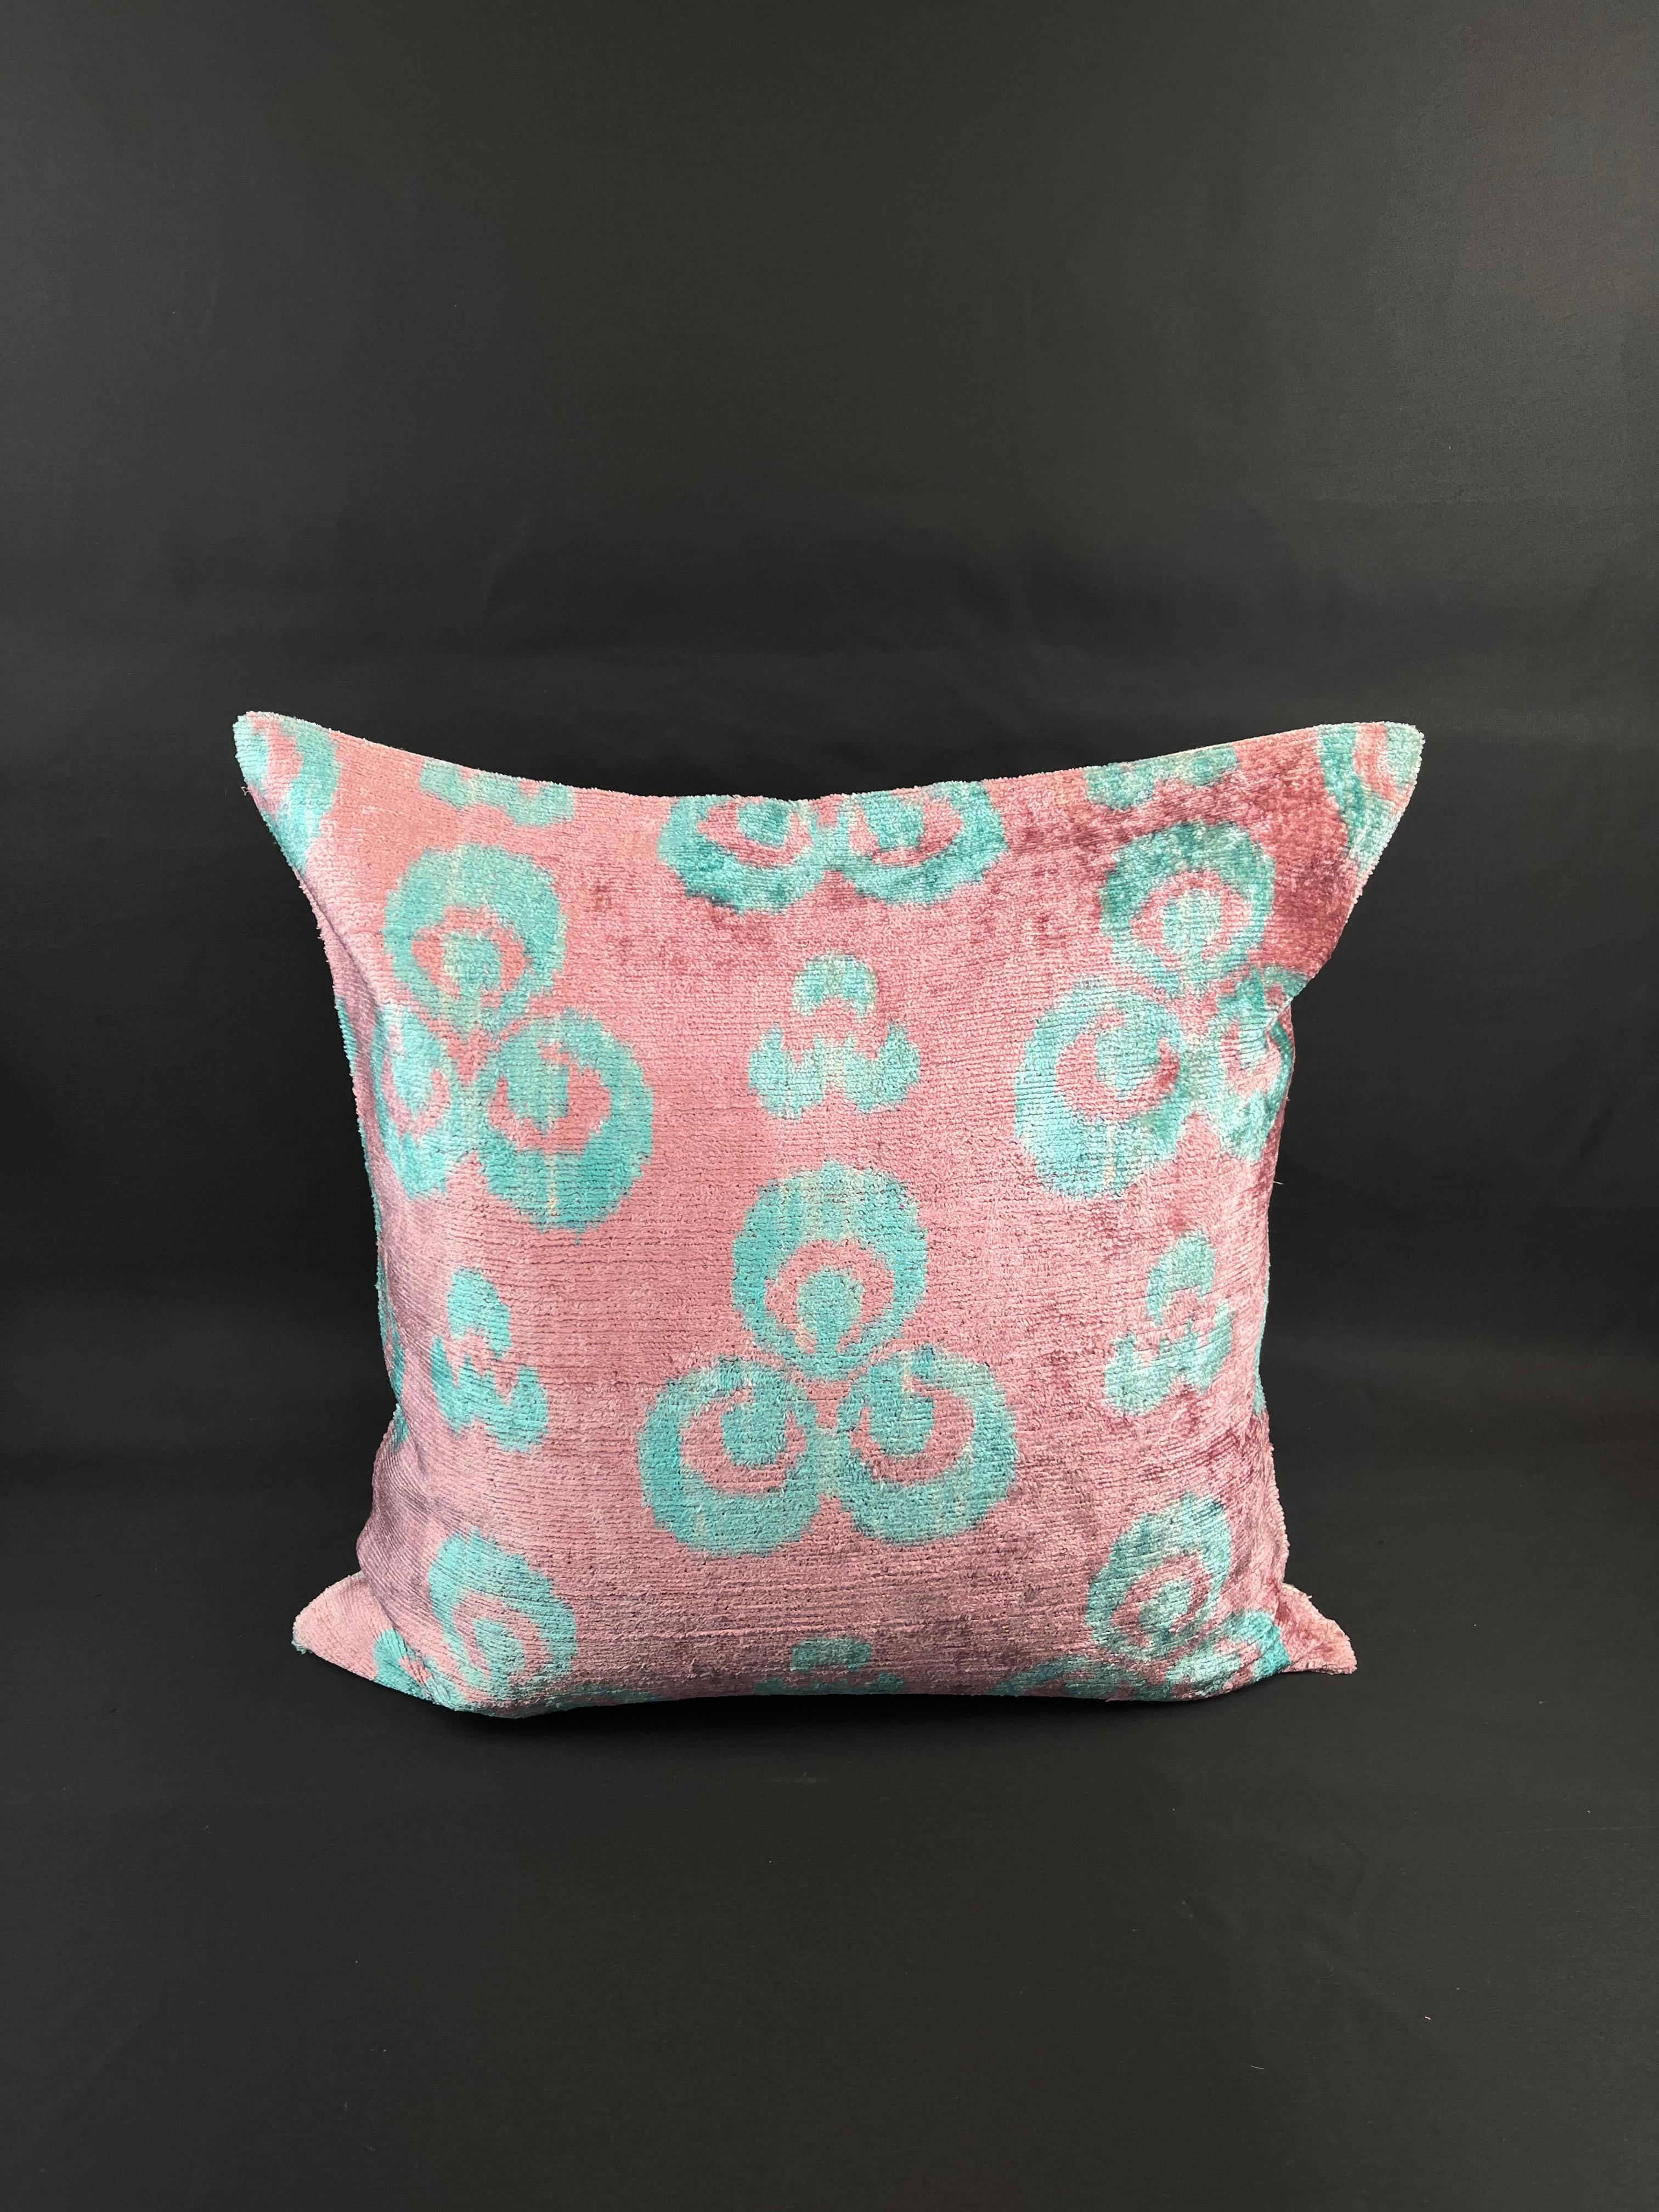 Pink and Blue Velvet Silk Ikat Pillow Cover In New Condition For Sale In Houston, TX